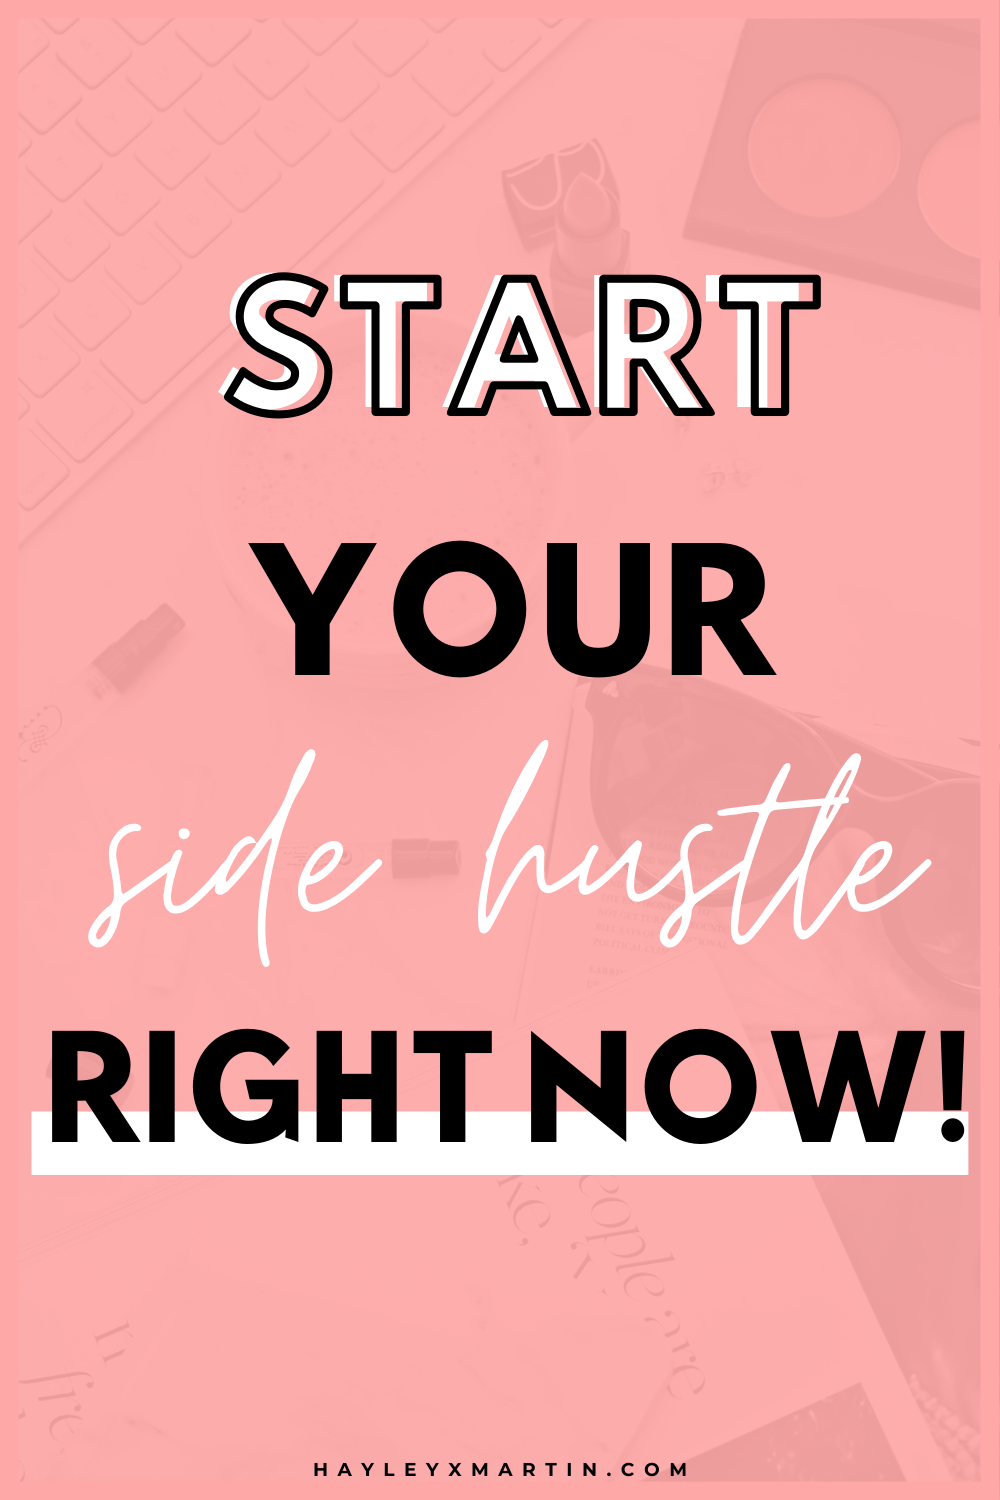 START YOUR SIDE HUSTLE RIGHT NOW | HAYLEYXMARTIN